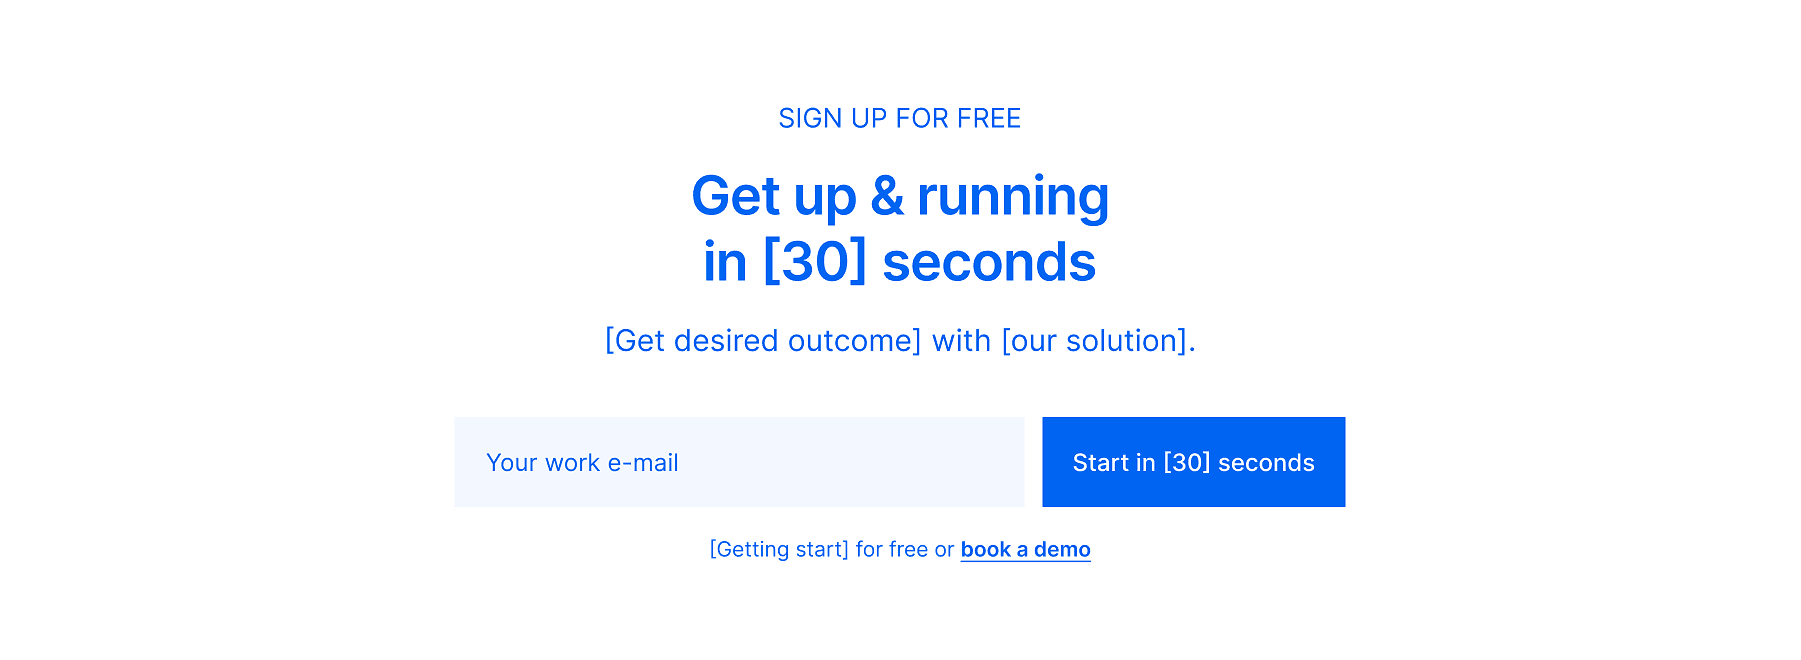 Blueprint of get up and running in 30 seconds